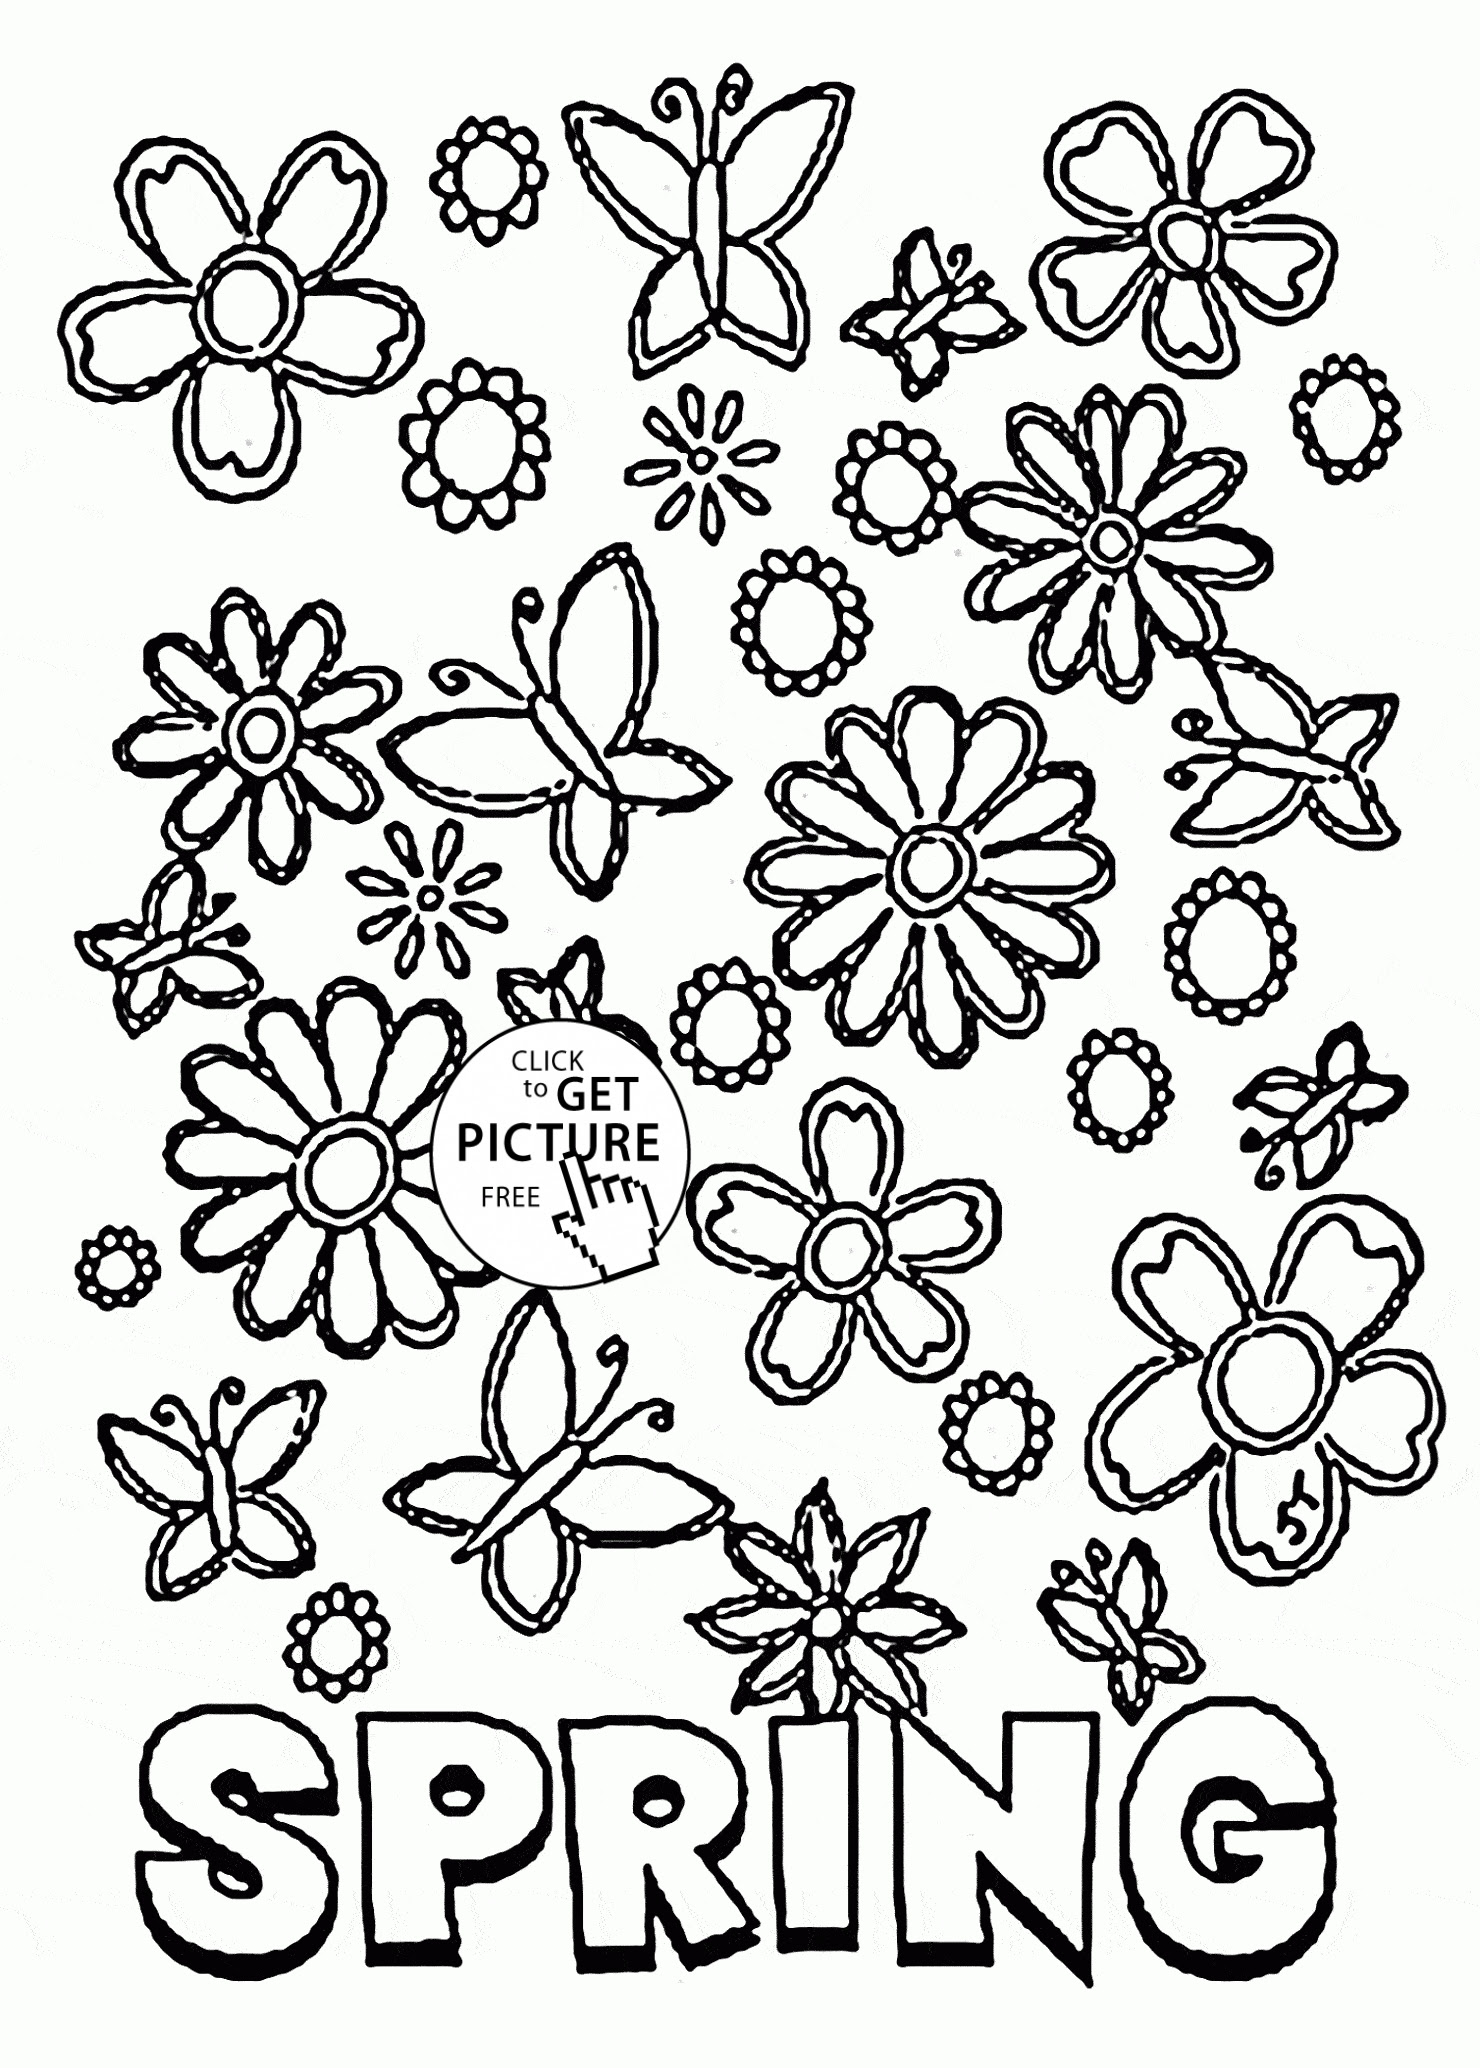 spring-coloring-sheets-free-printable-spring-coloring-pages